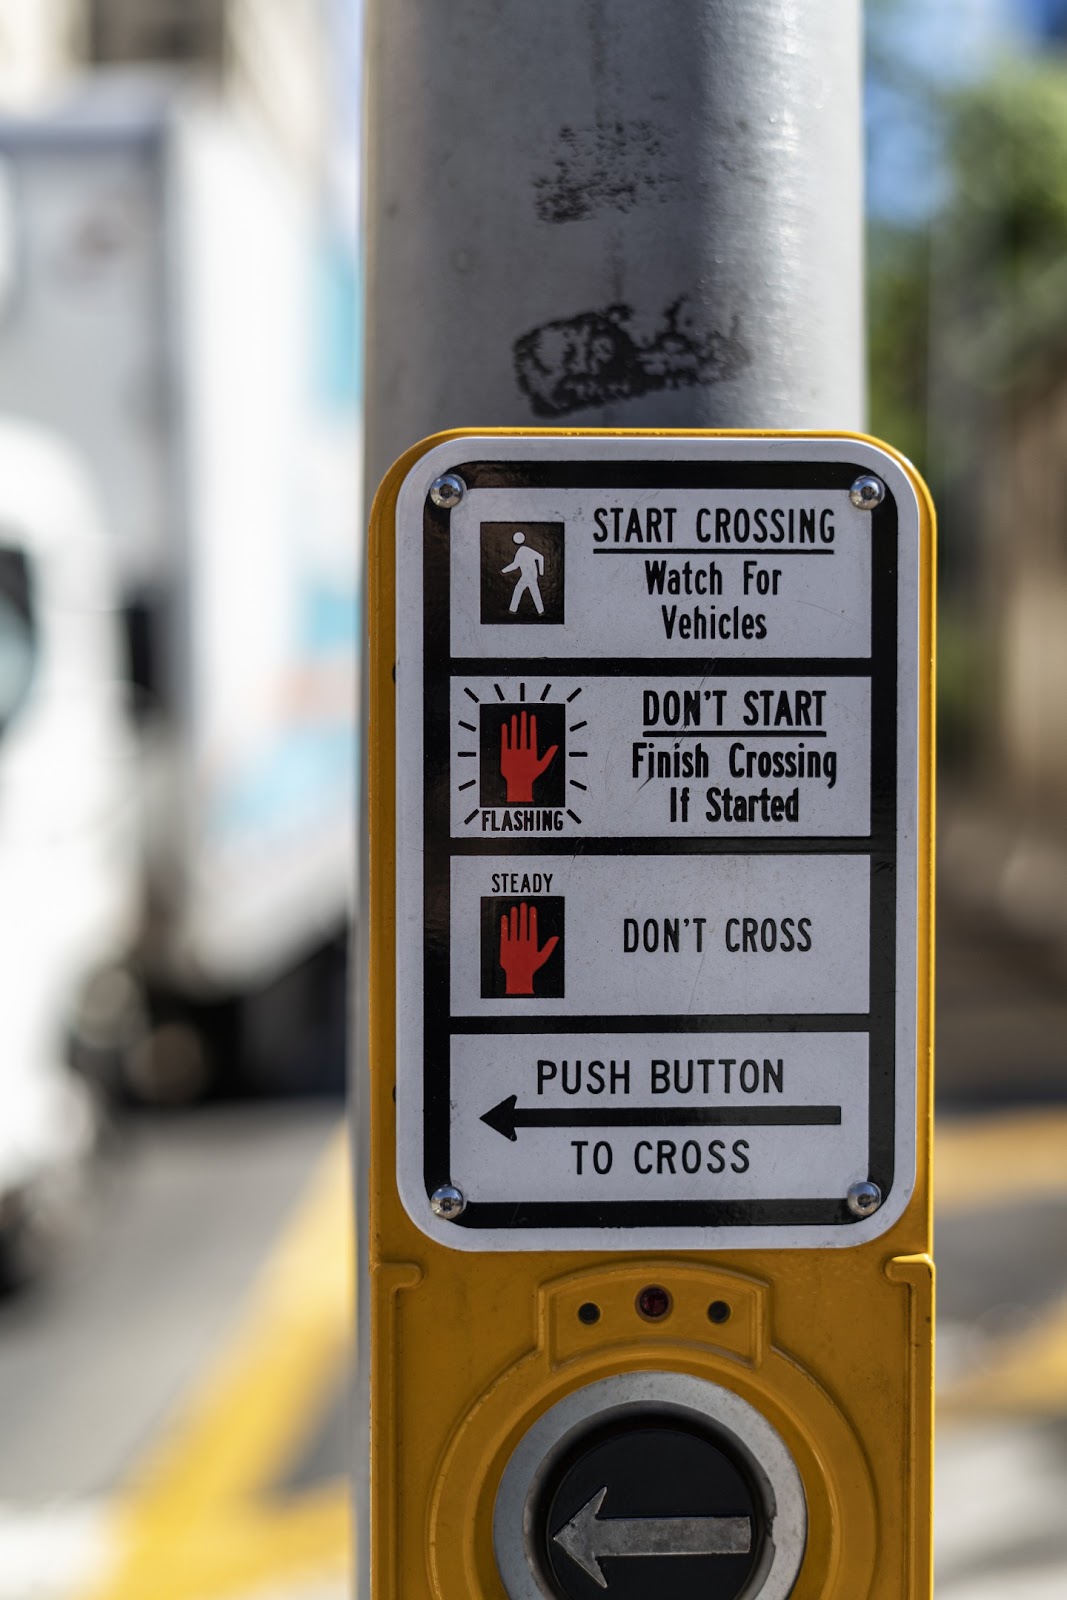 An overly complex crosswalk sign with lots of text and icons.